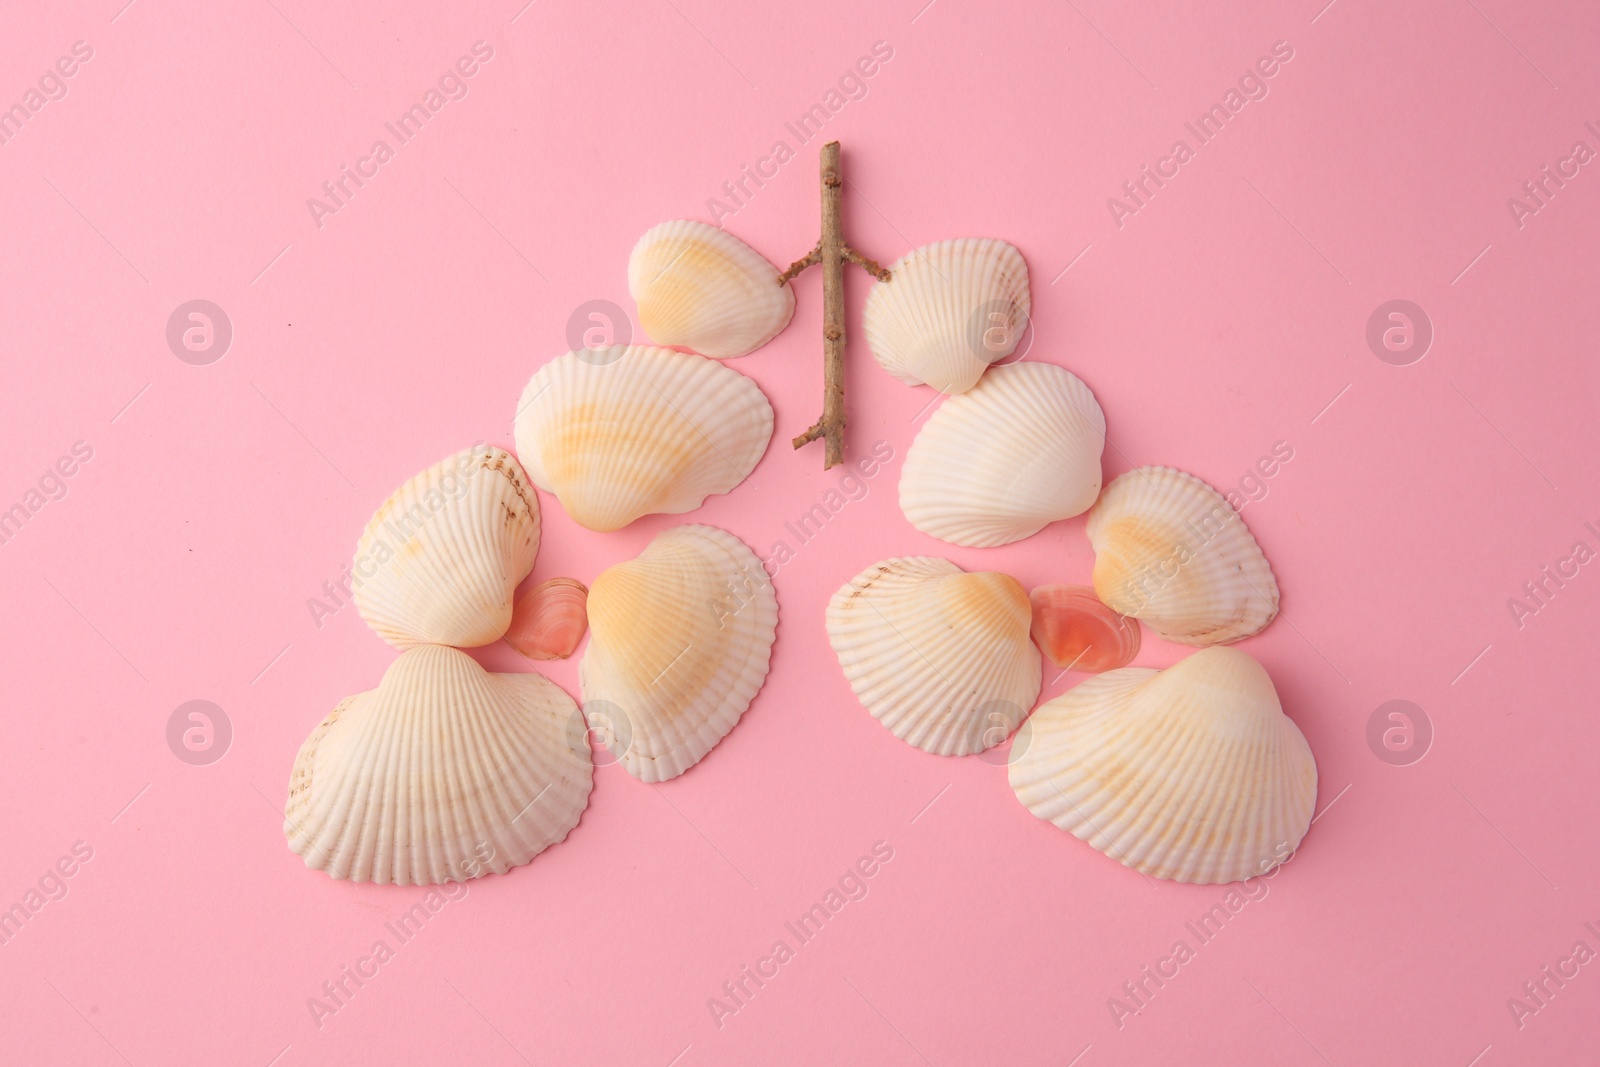 Photo of Human lungs made of seashells on pink background, flat lay